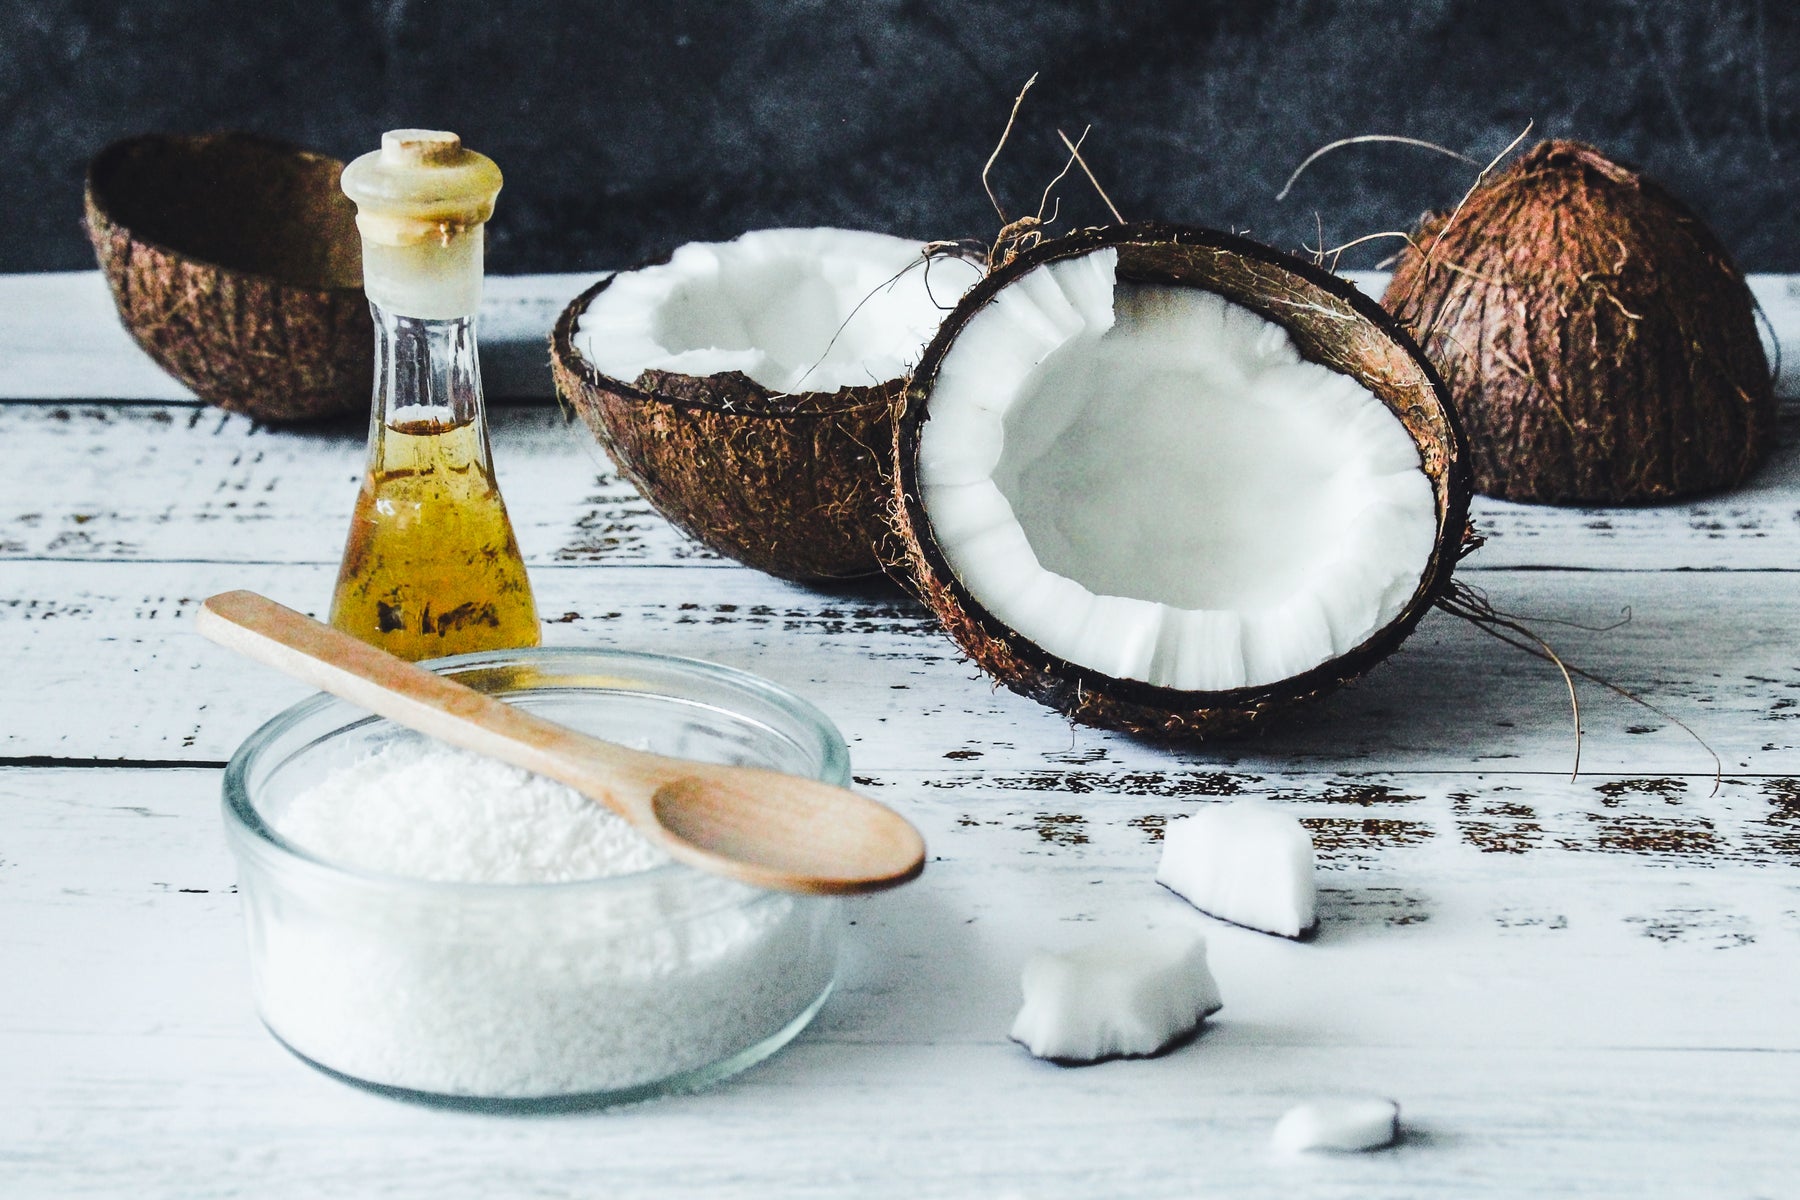 Coconut Allergies and What You Need to Know